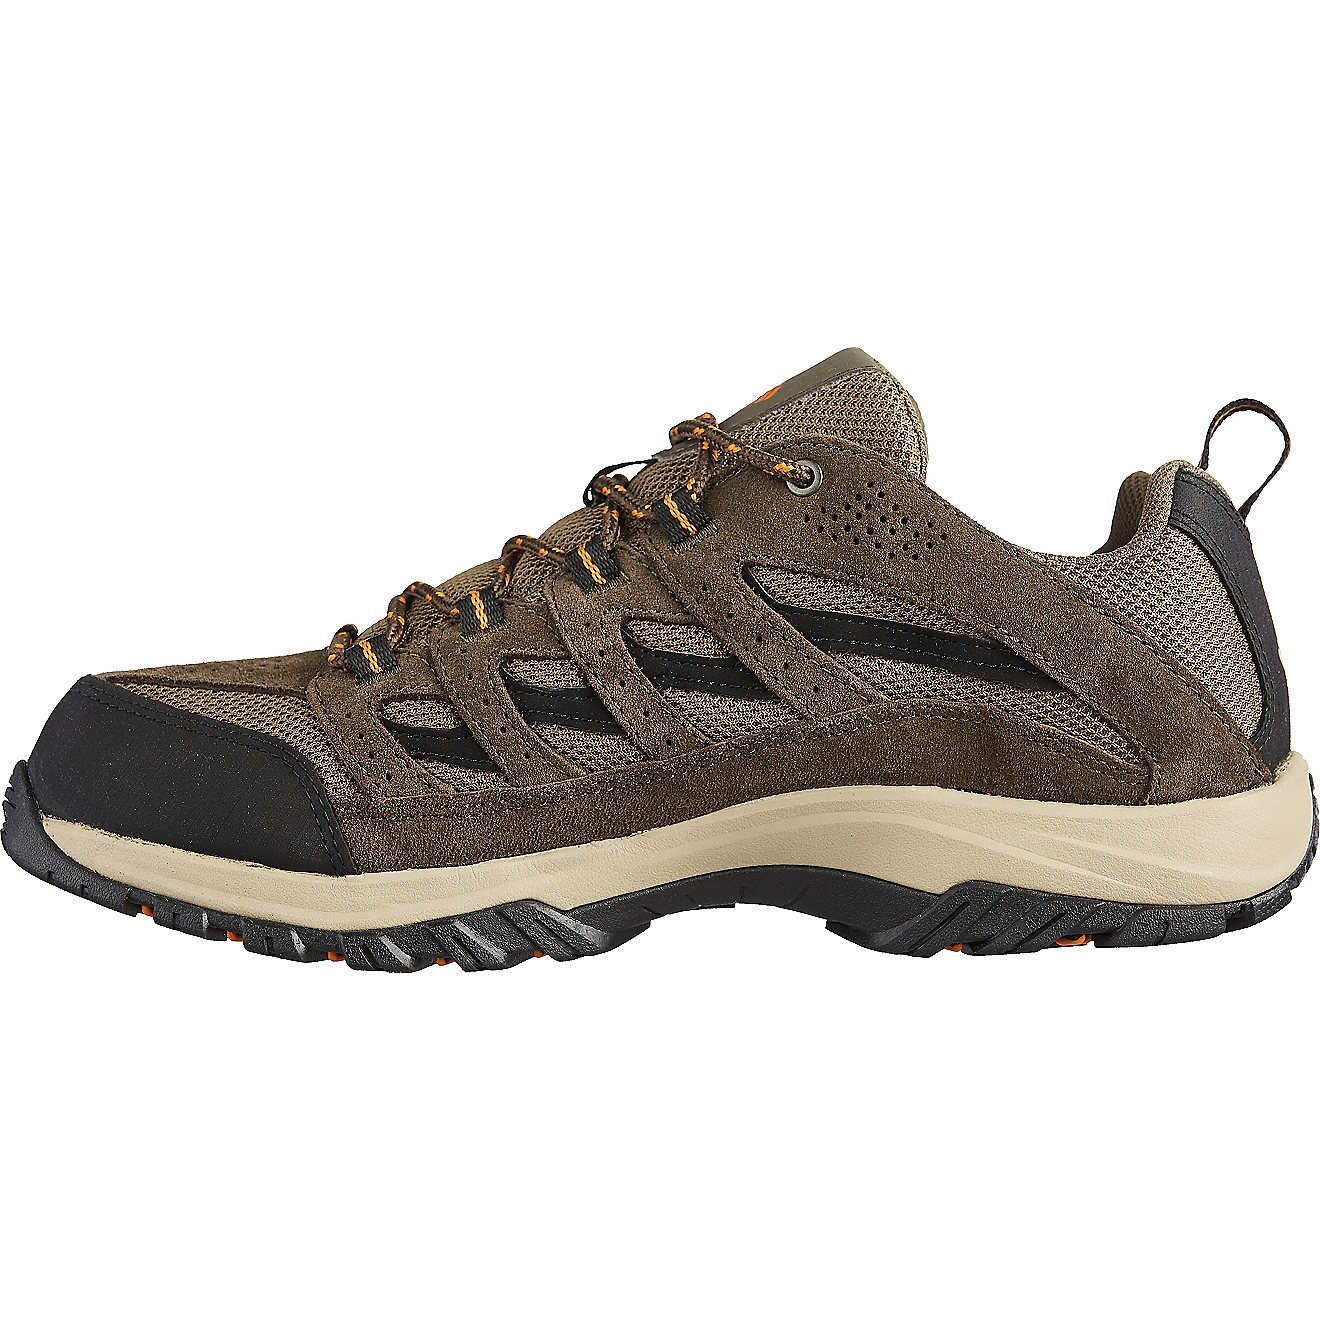 Columbia Sportswear Men's Crestwood Low Hiking Shoes | Academy